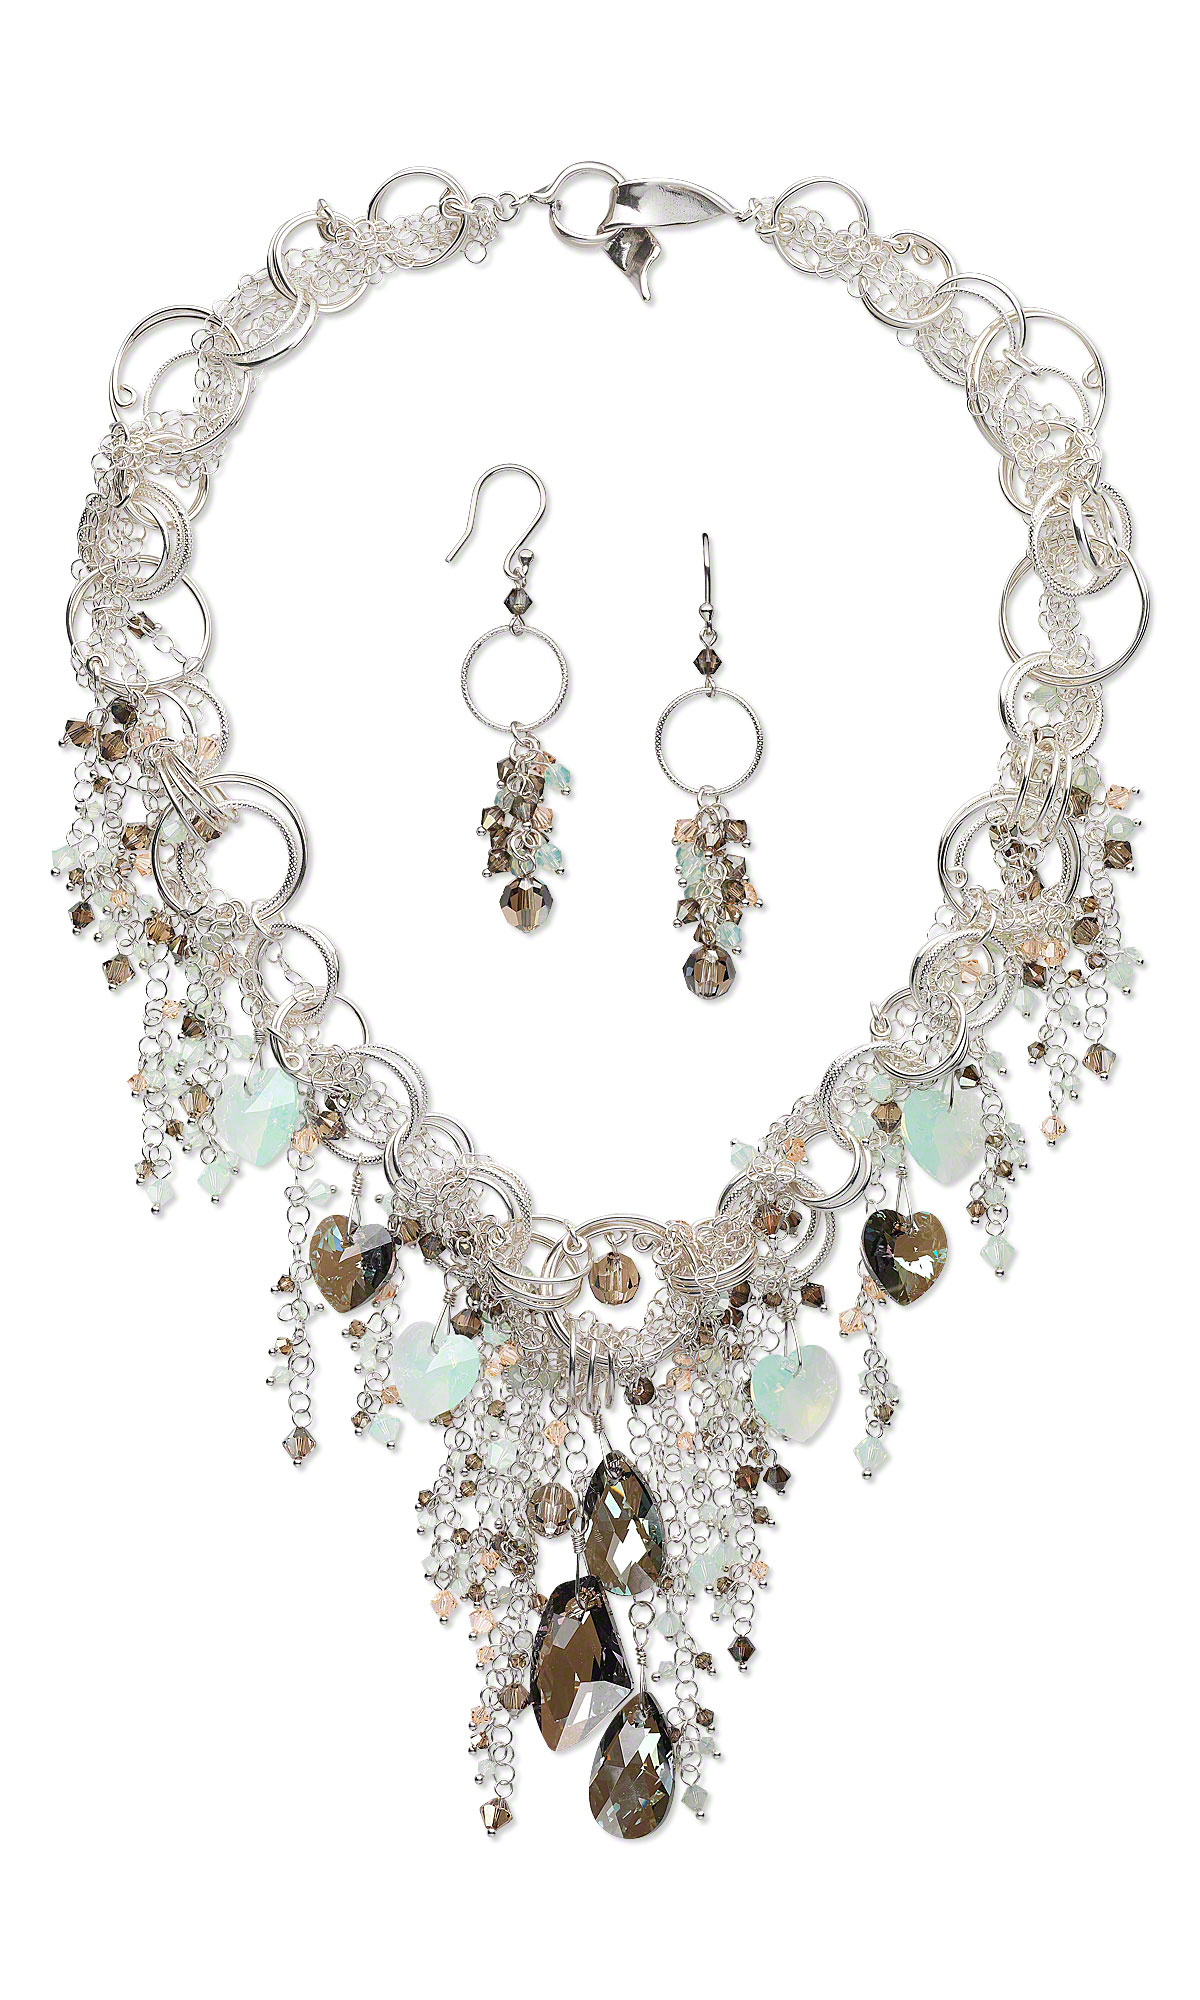 Jewelry Design - Multi-Strand Necklace and Earring Set with Swarovski ...